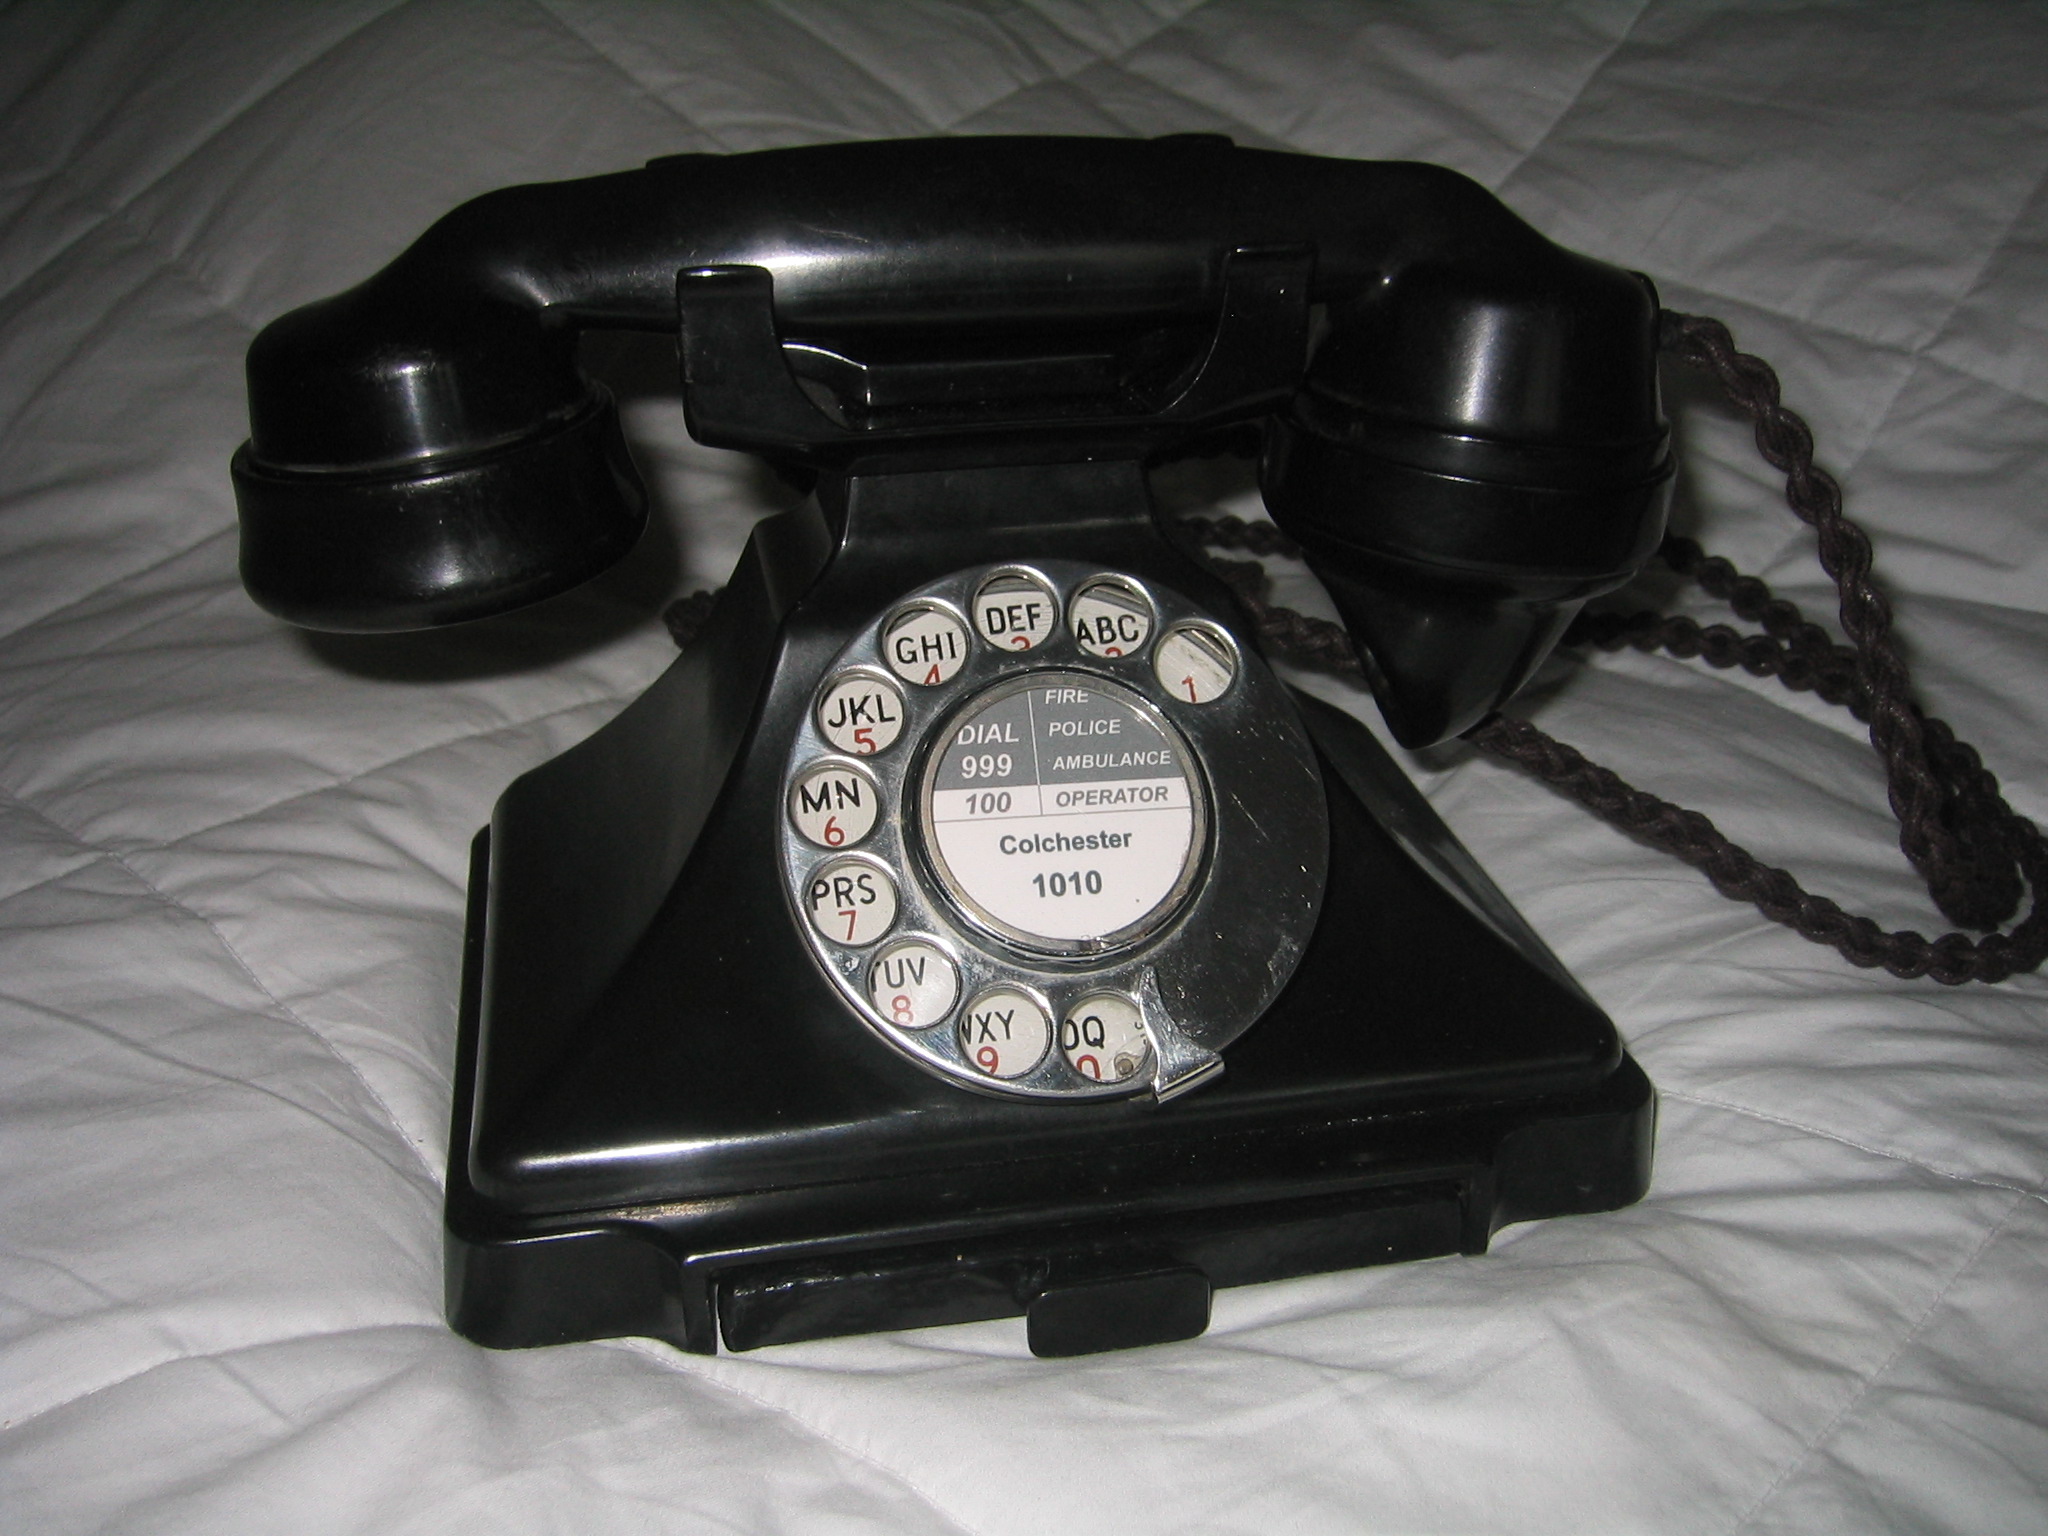 Top 10 Countries With Most Landline Telephones